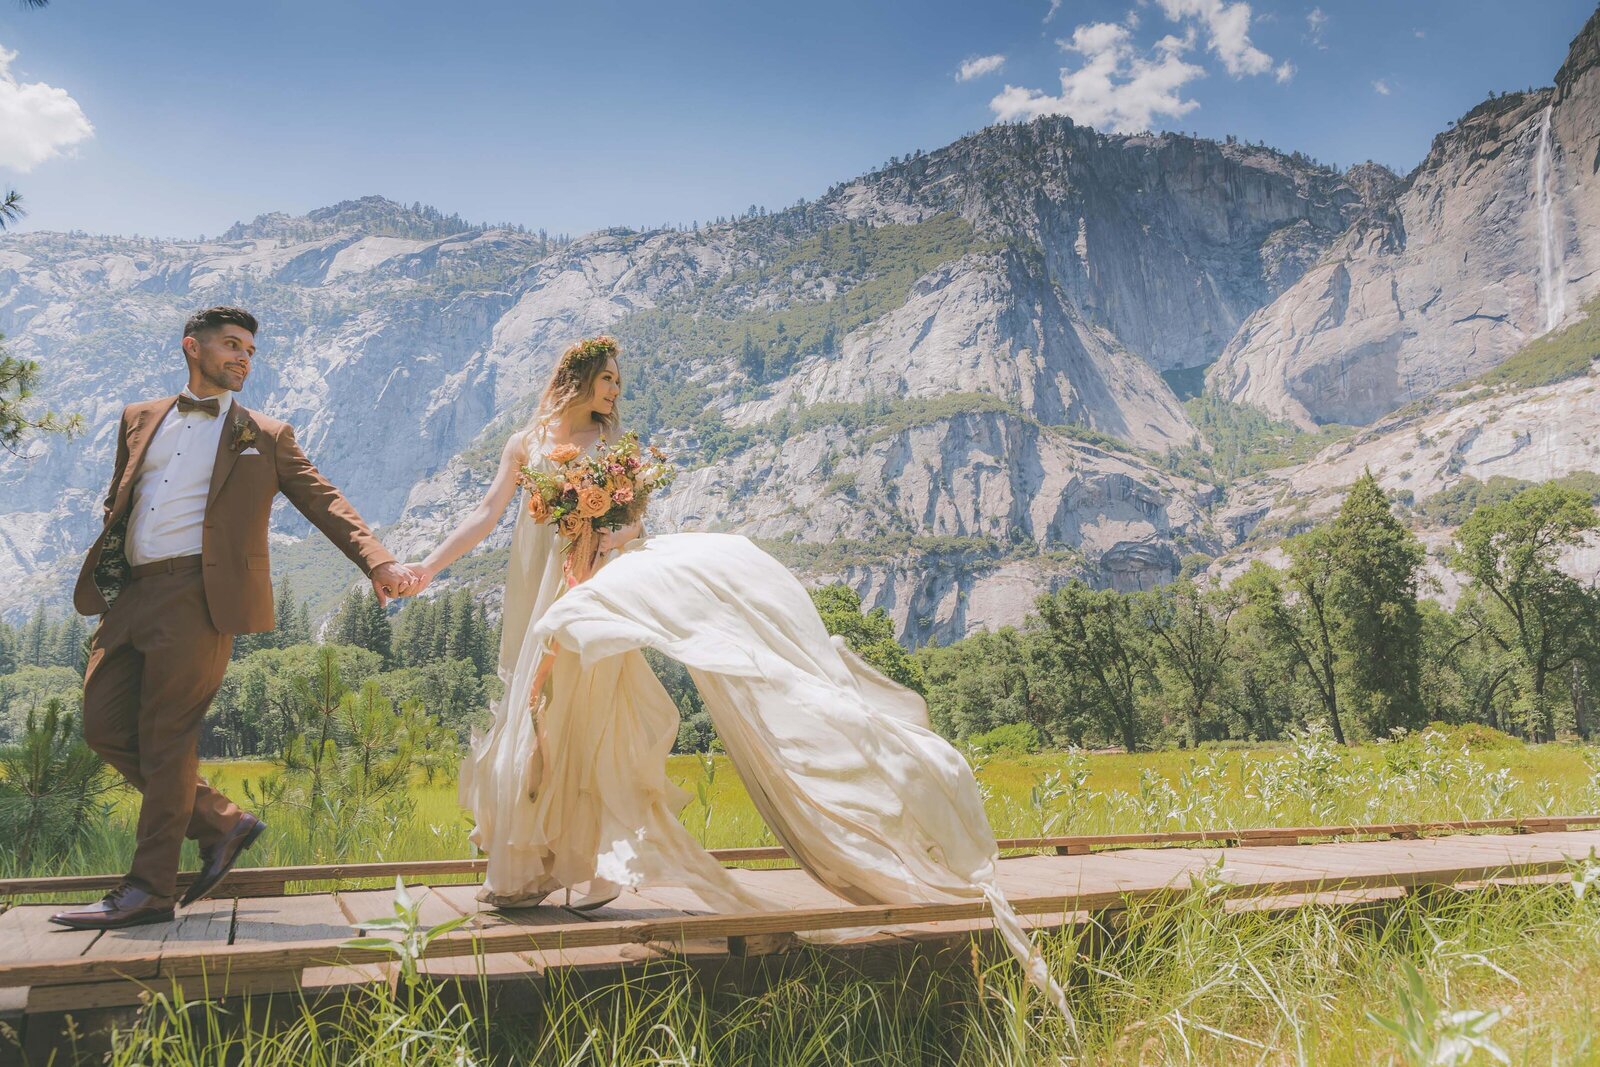 A groom leads his bride by hand as her dress flows in the breeze in Yosemite National Park.